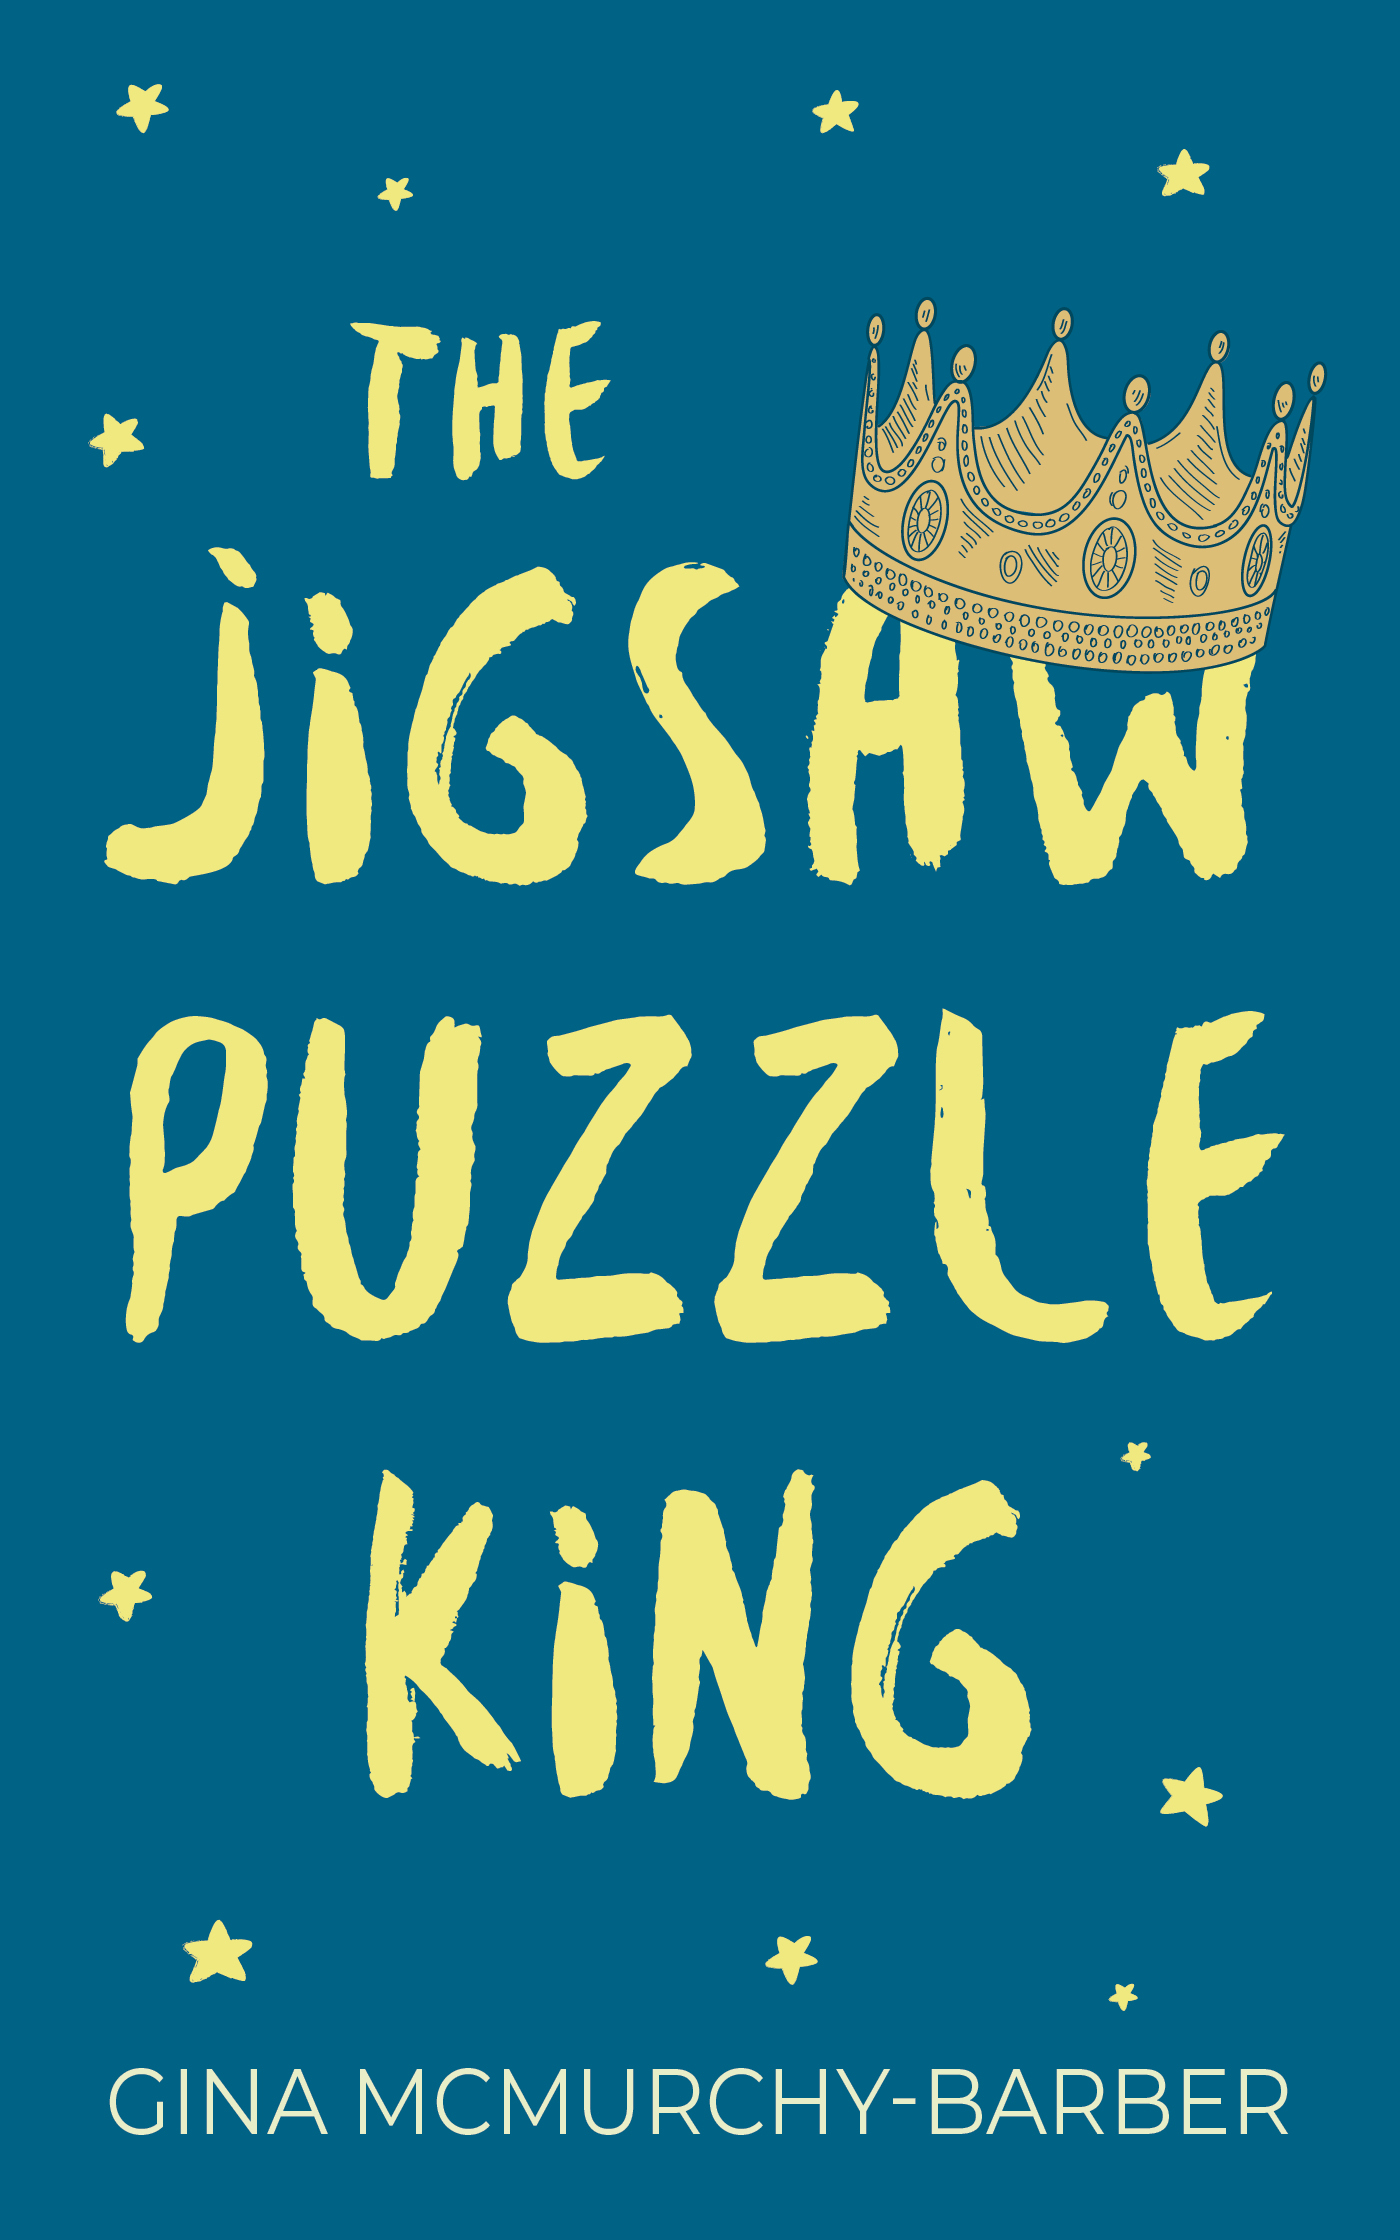 The Jigsaw Puzzle King